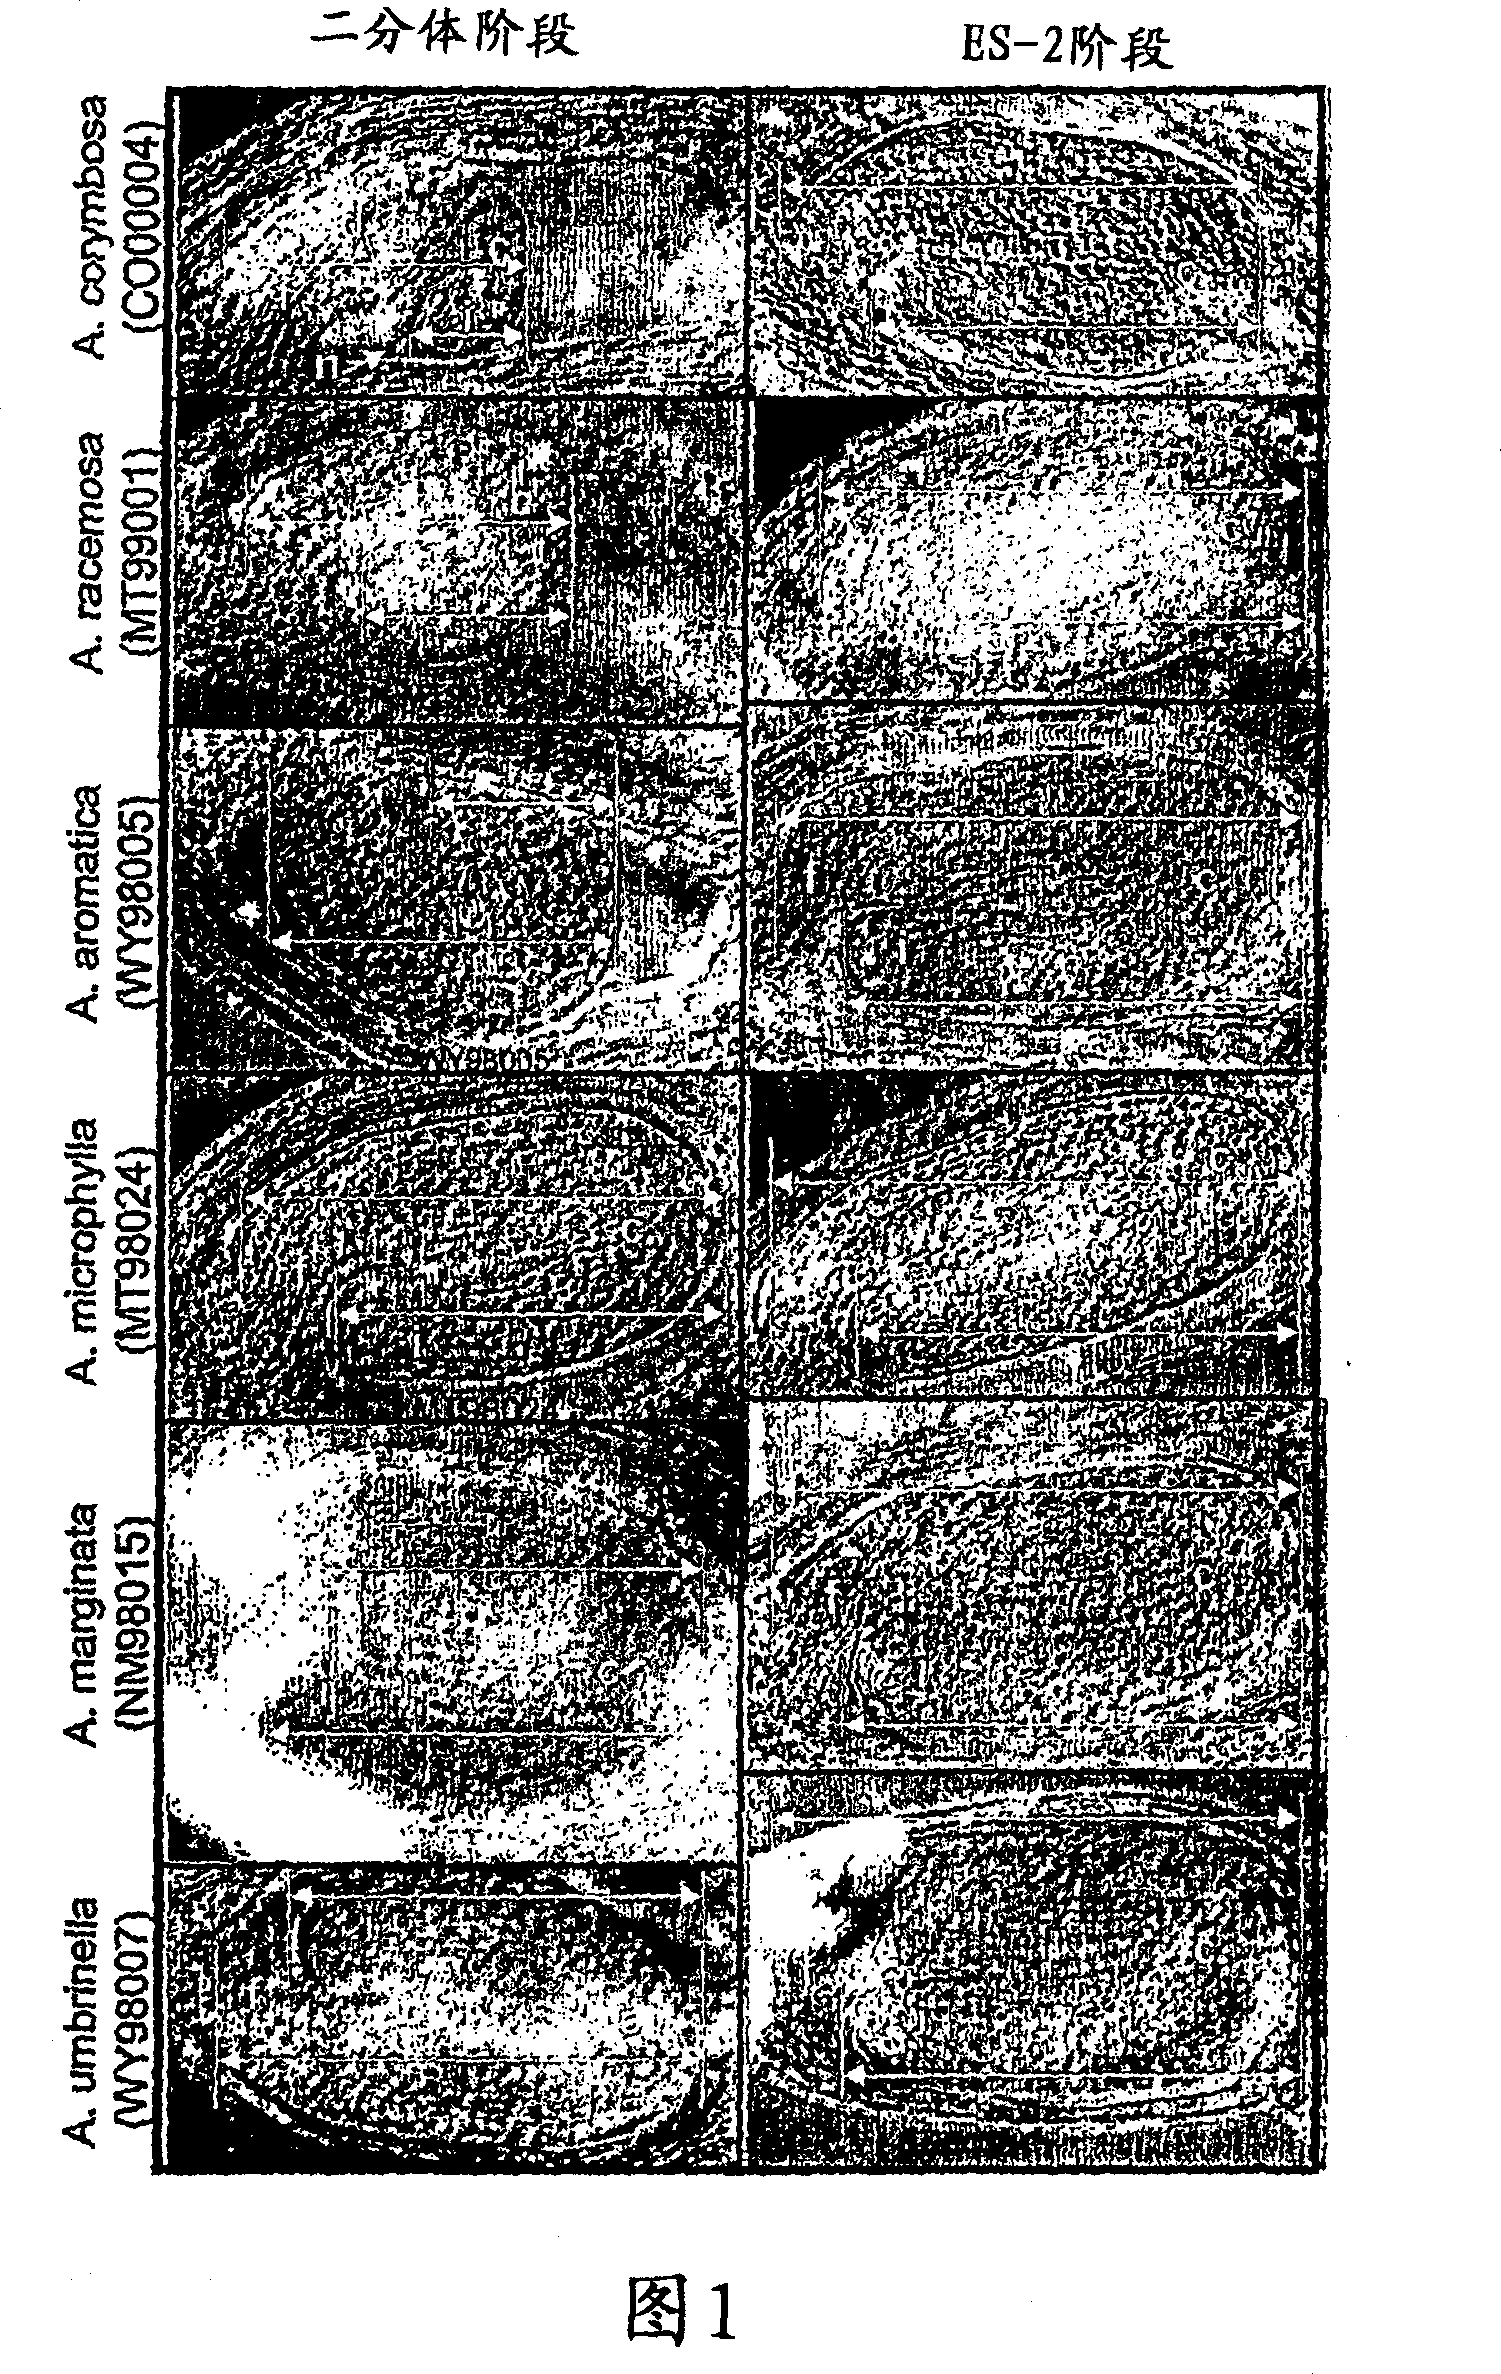 Methods for increasing the frequency of apomixis expression in angiosperms